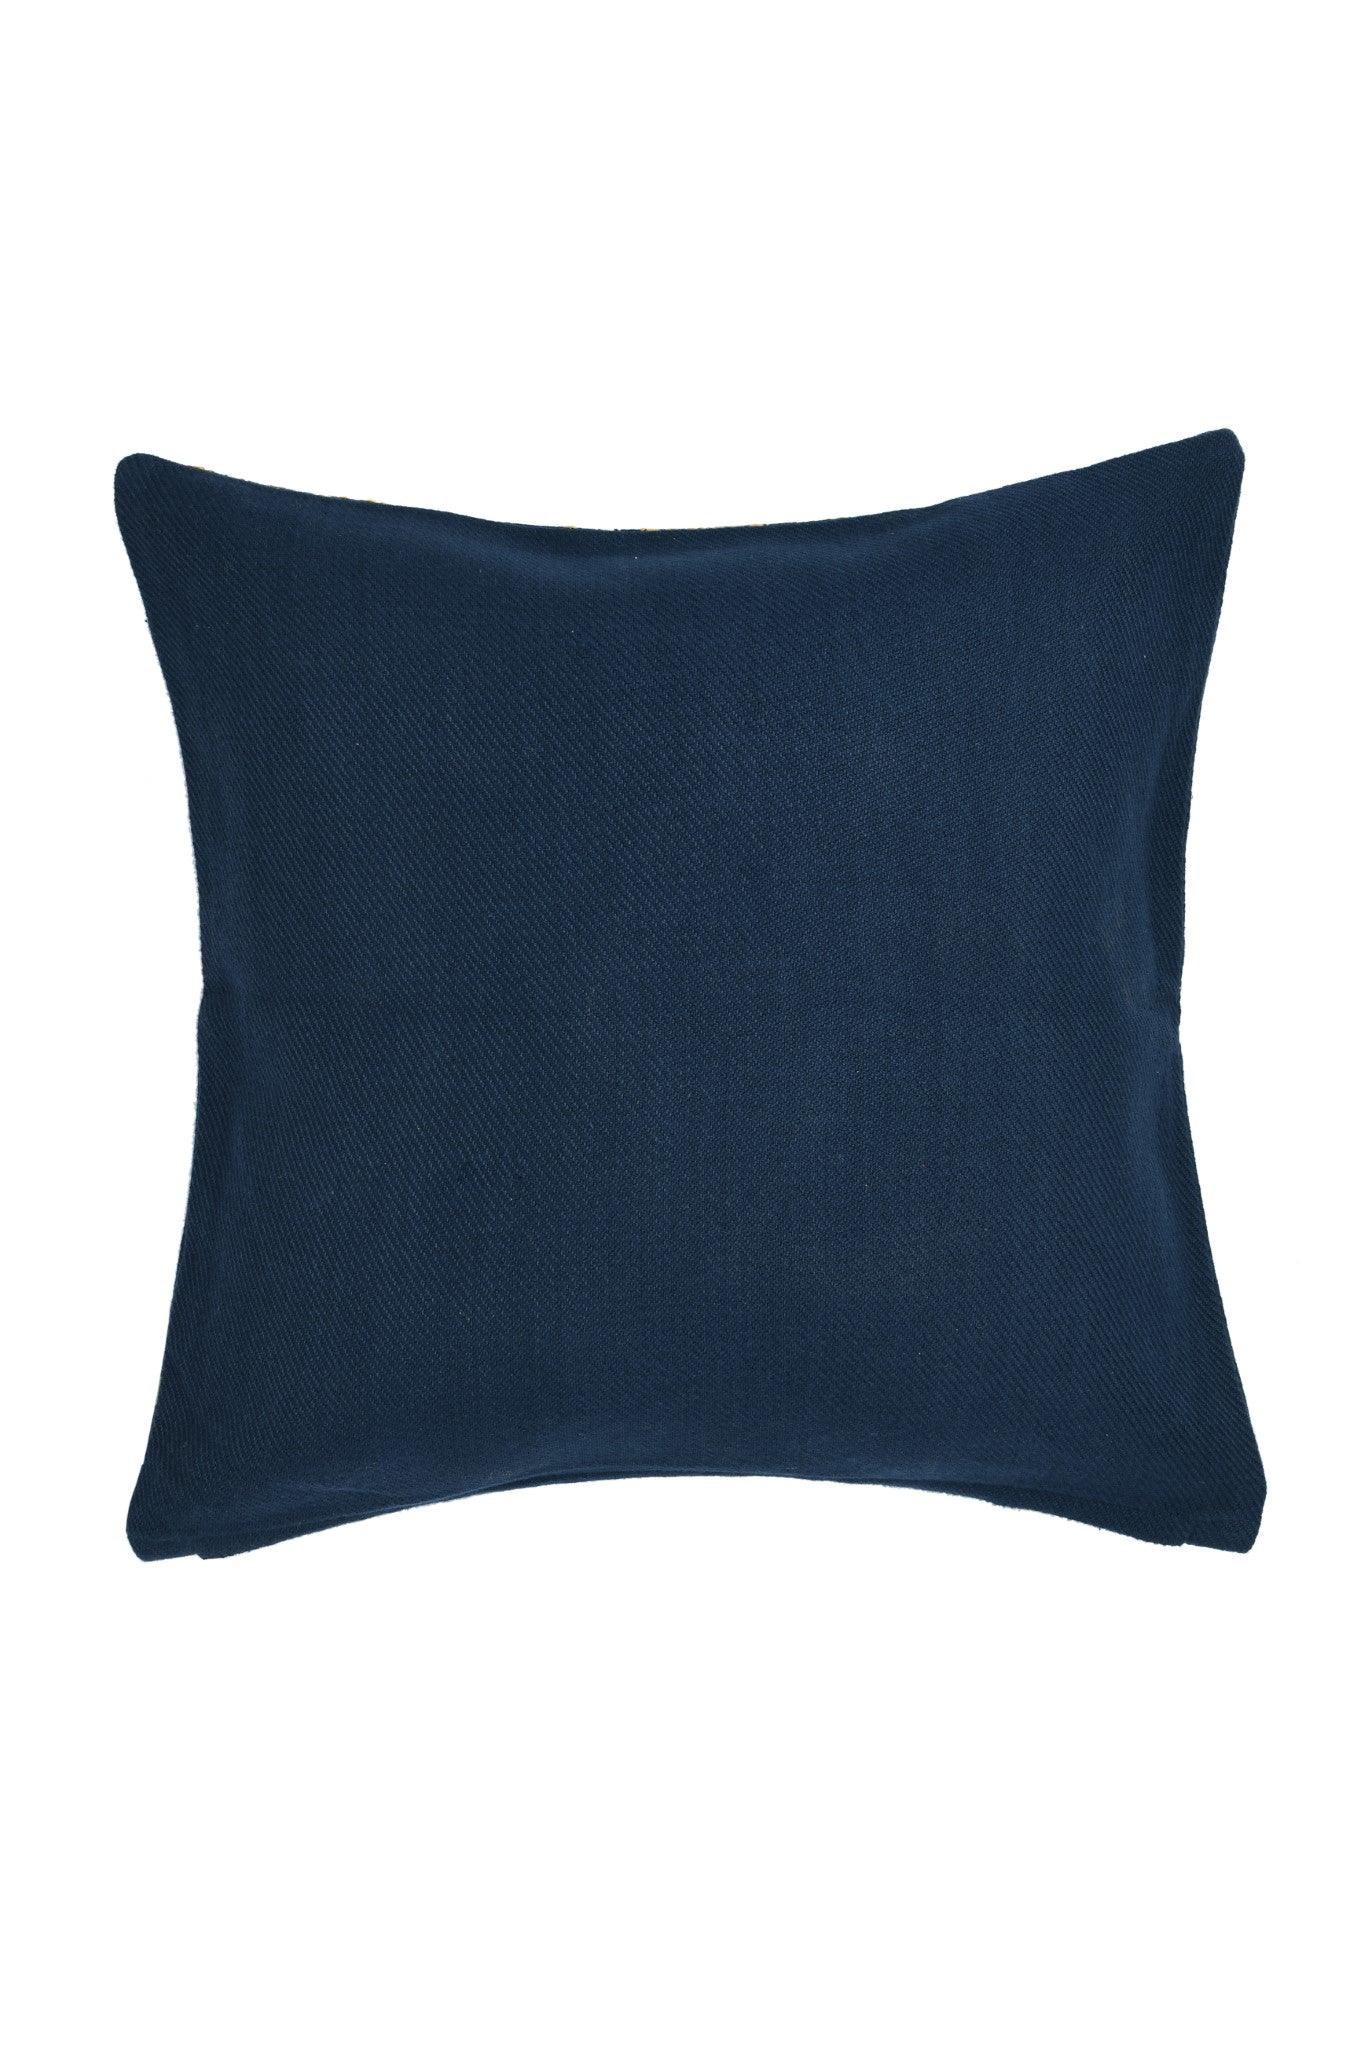 Suti Diamond Motif Extra Weft Woven 16X16 Cushion Cover in Navy